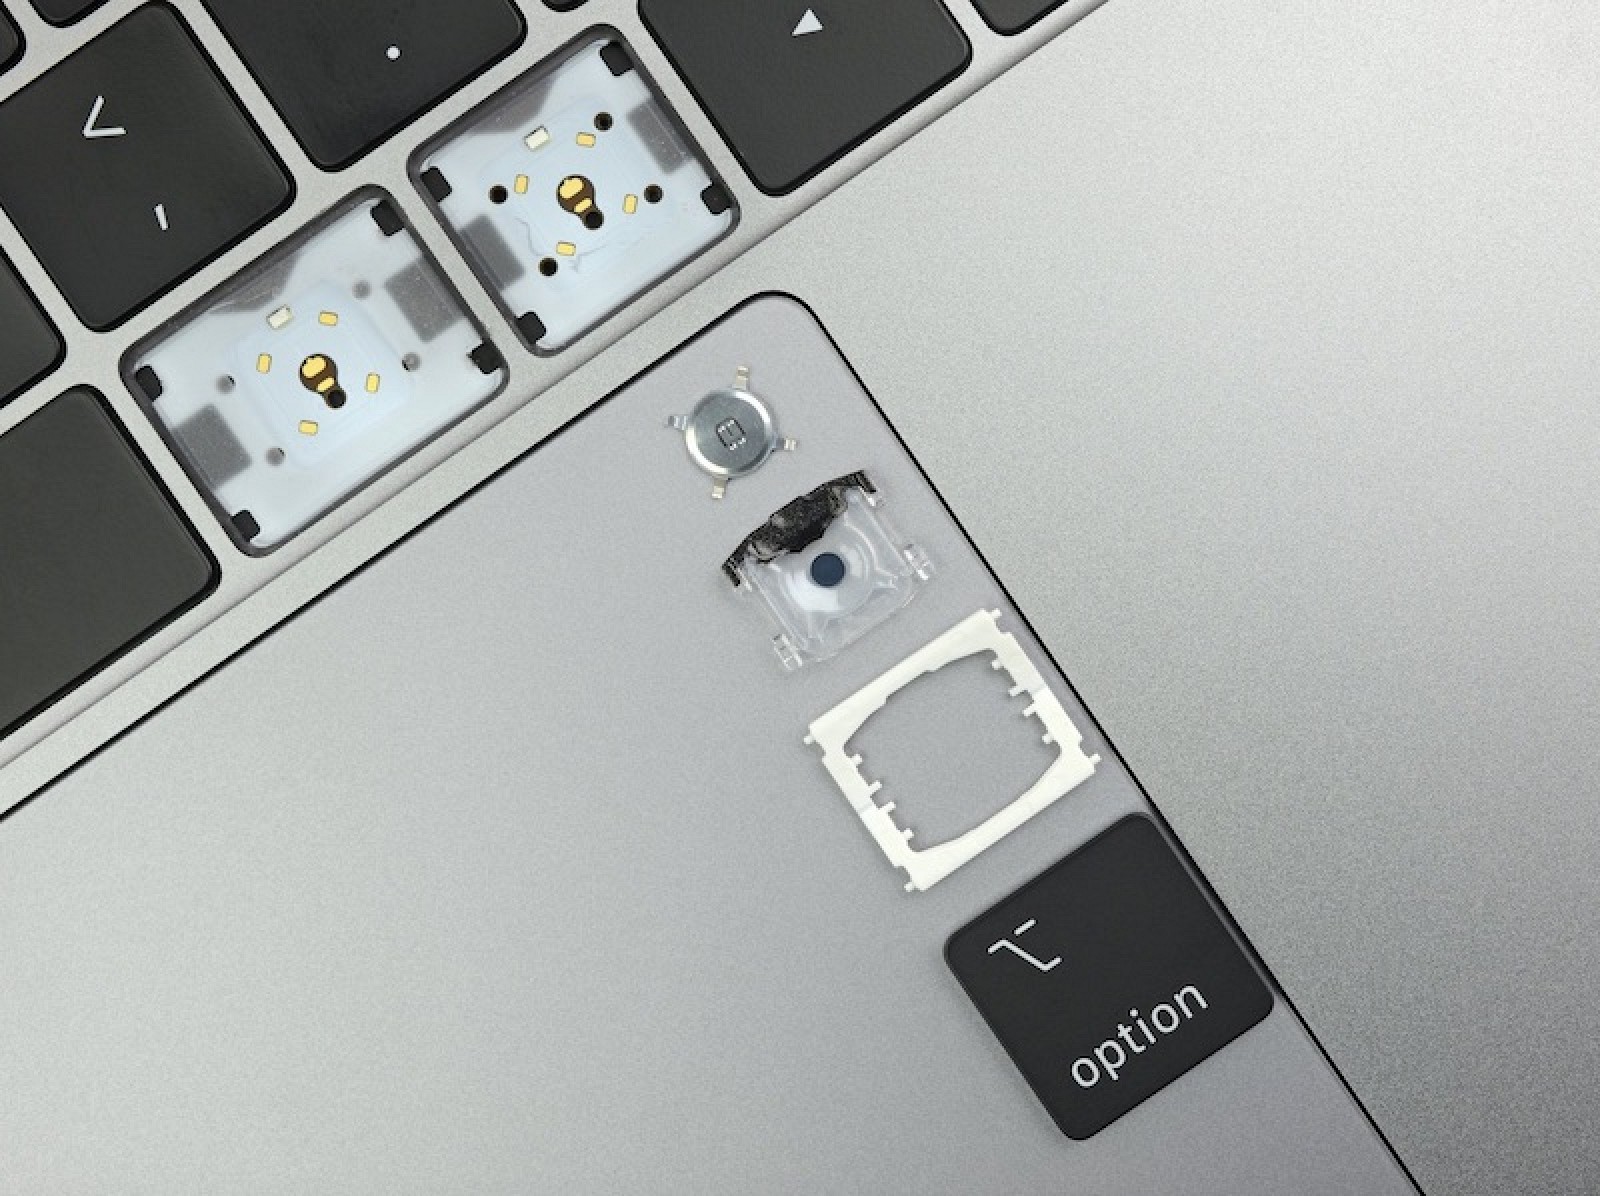 New MacBook Air and Base 13-Inch MacBook Pro Have Same Keyboard as Higher-End 2019 MacBook Pros